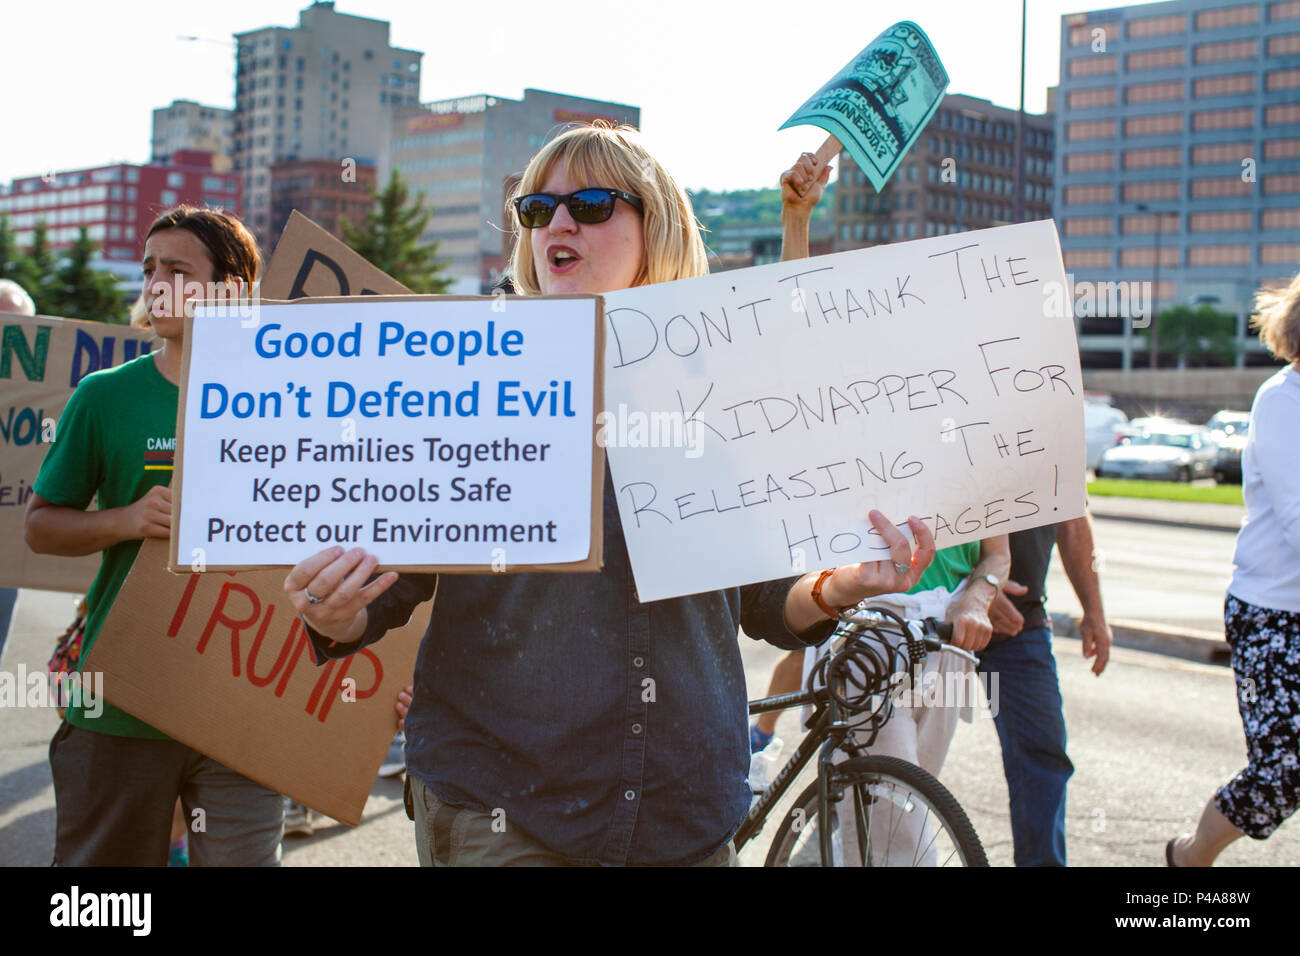 DULUTH, MINNESOTA, USA - June 20, 2018: A woman protester holds signs as a large crowd of protesters march in front of Amsoil arena while President Donald Trump speaks at a rally Wednesday night. Credit: Theresa Scarbrough/Alamy Live News Stock Photo